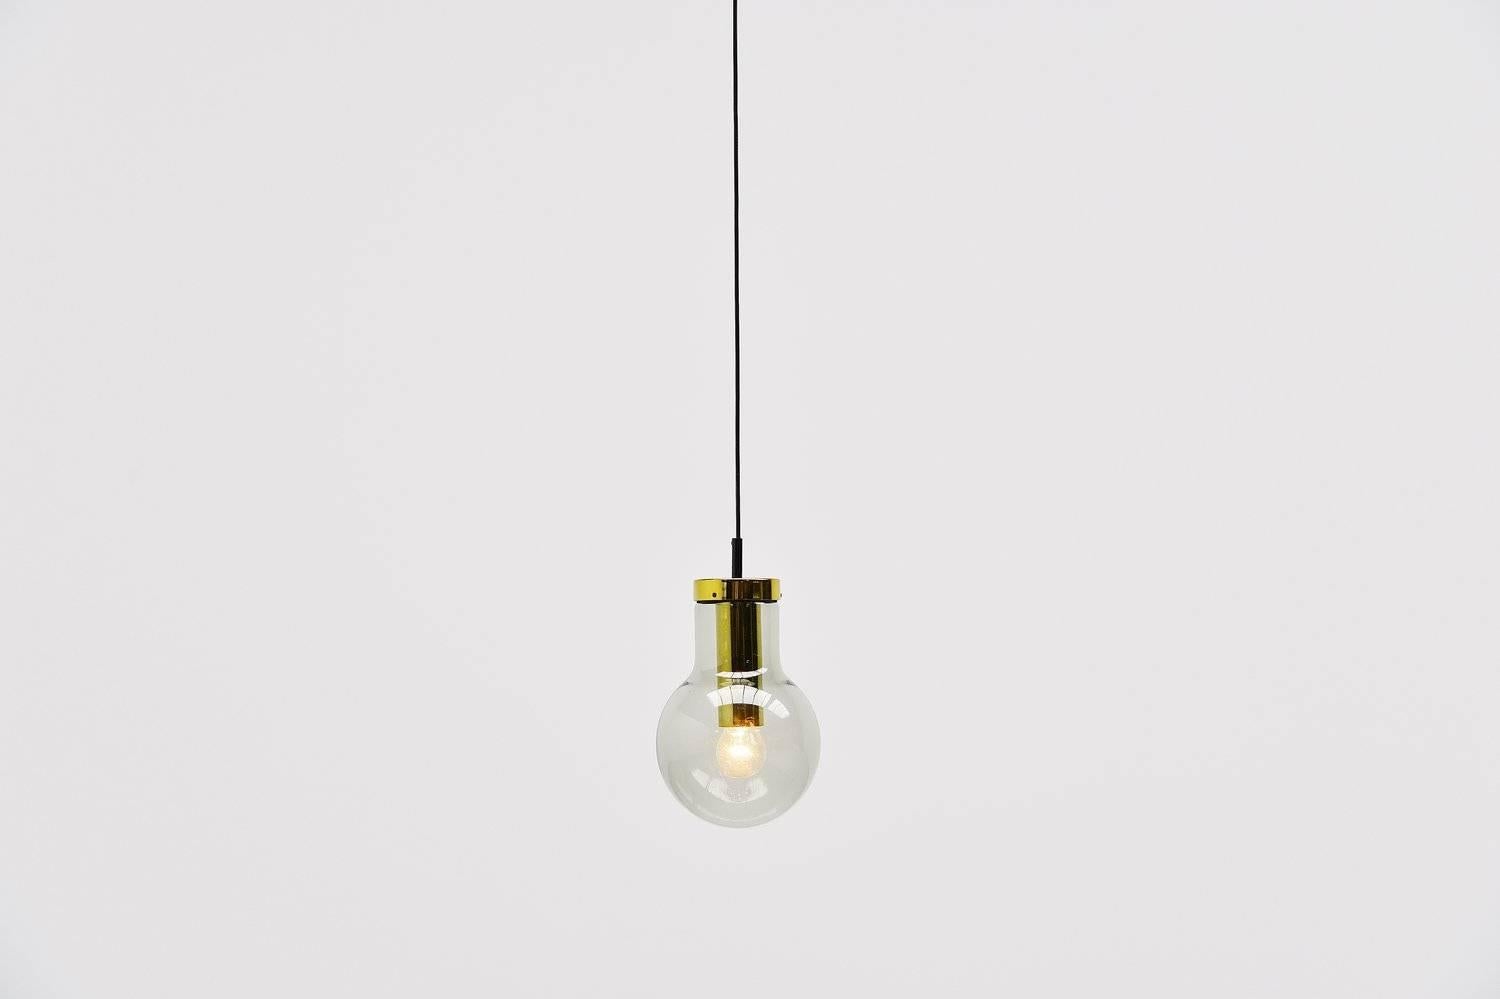 Very nice set of 4 pendant lamps designed and made by RAAK Amsterdam, Holland 1965. These lamps are called maxi globes and this is the smallest version available. The lamps have grey fume glass and a brass fixture. They can be used as ceiling lamp